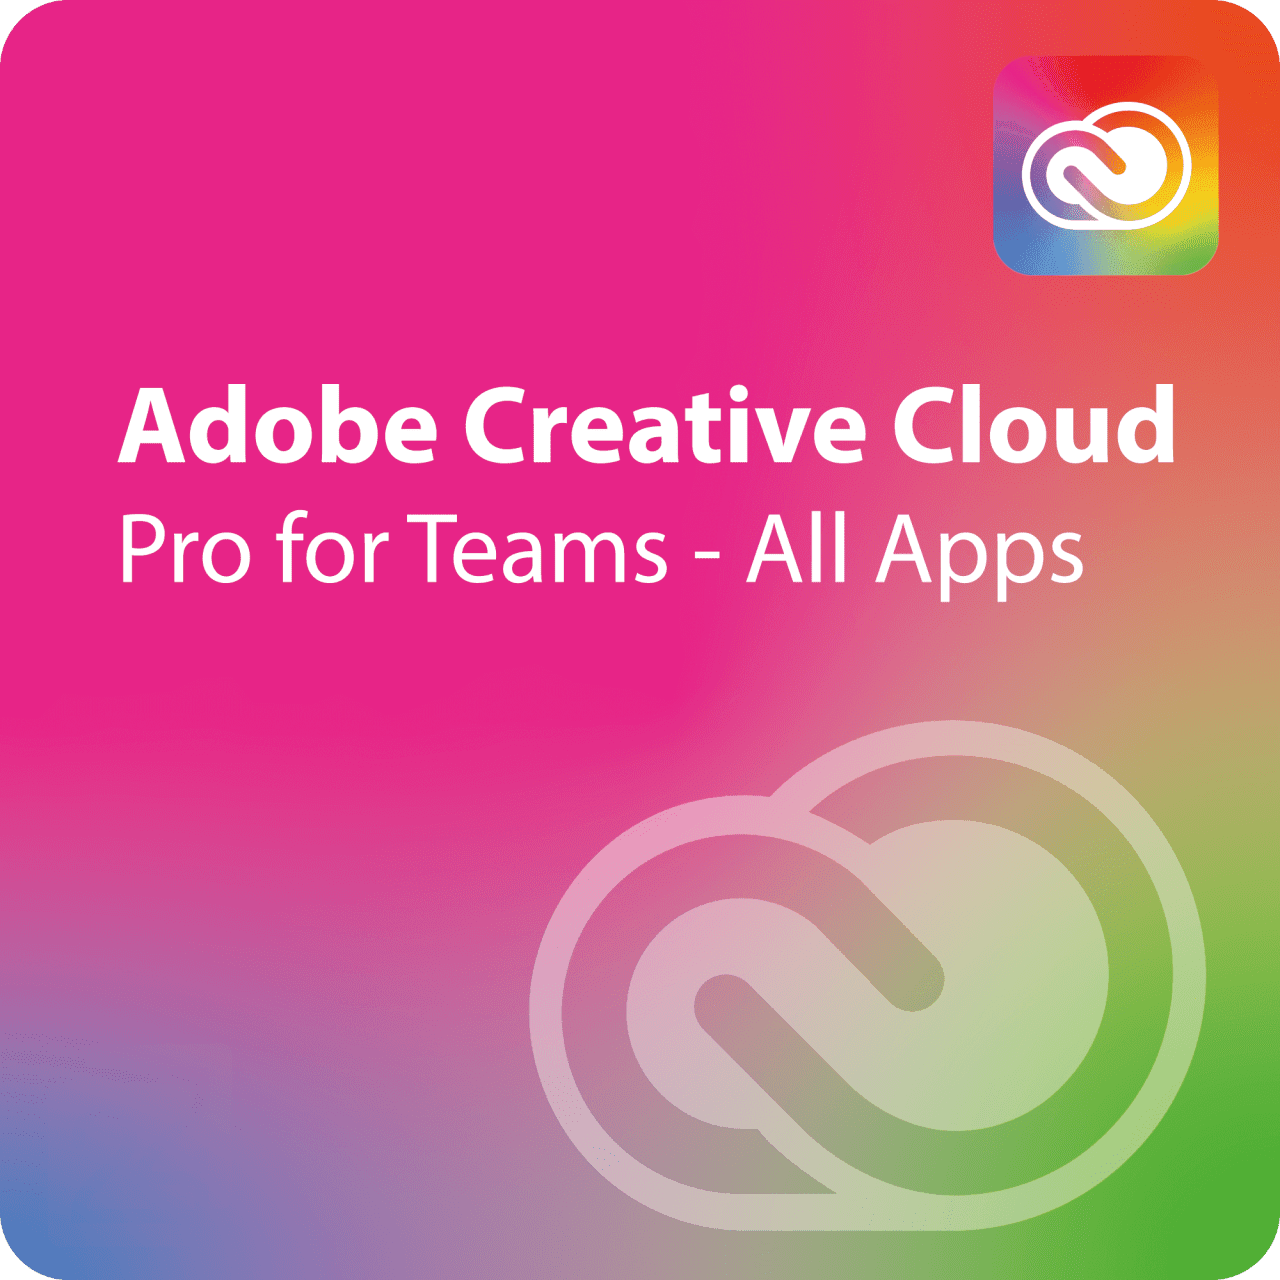 Adobe Creative Cloud All Apps - Pro for Teams